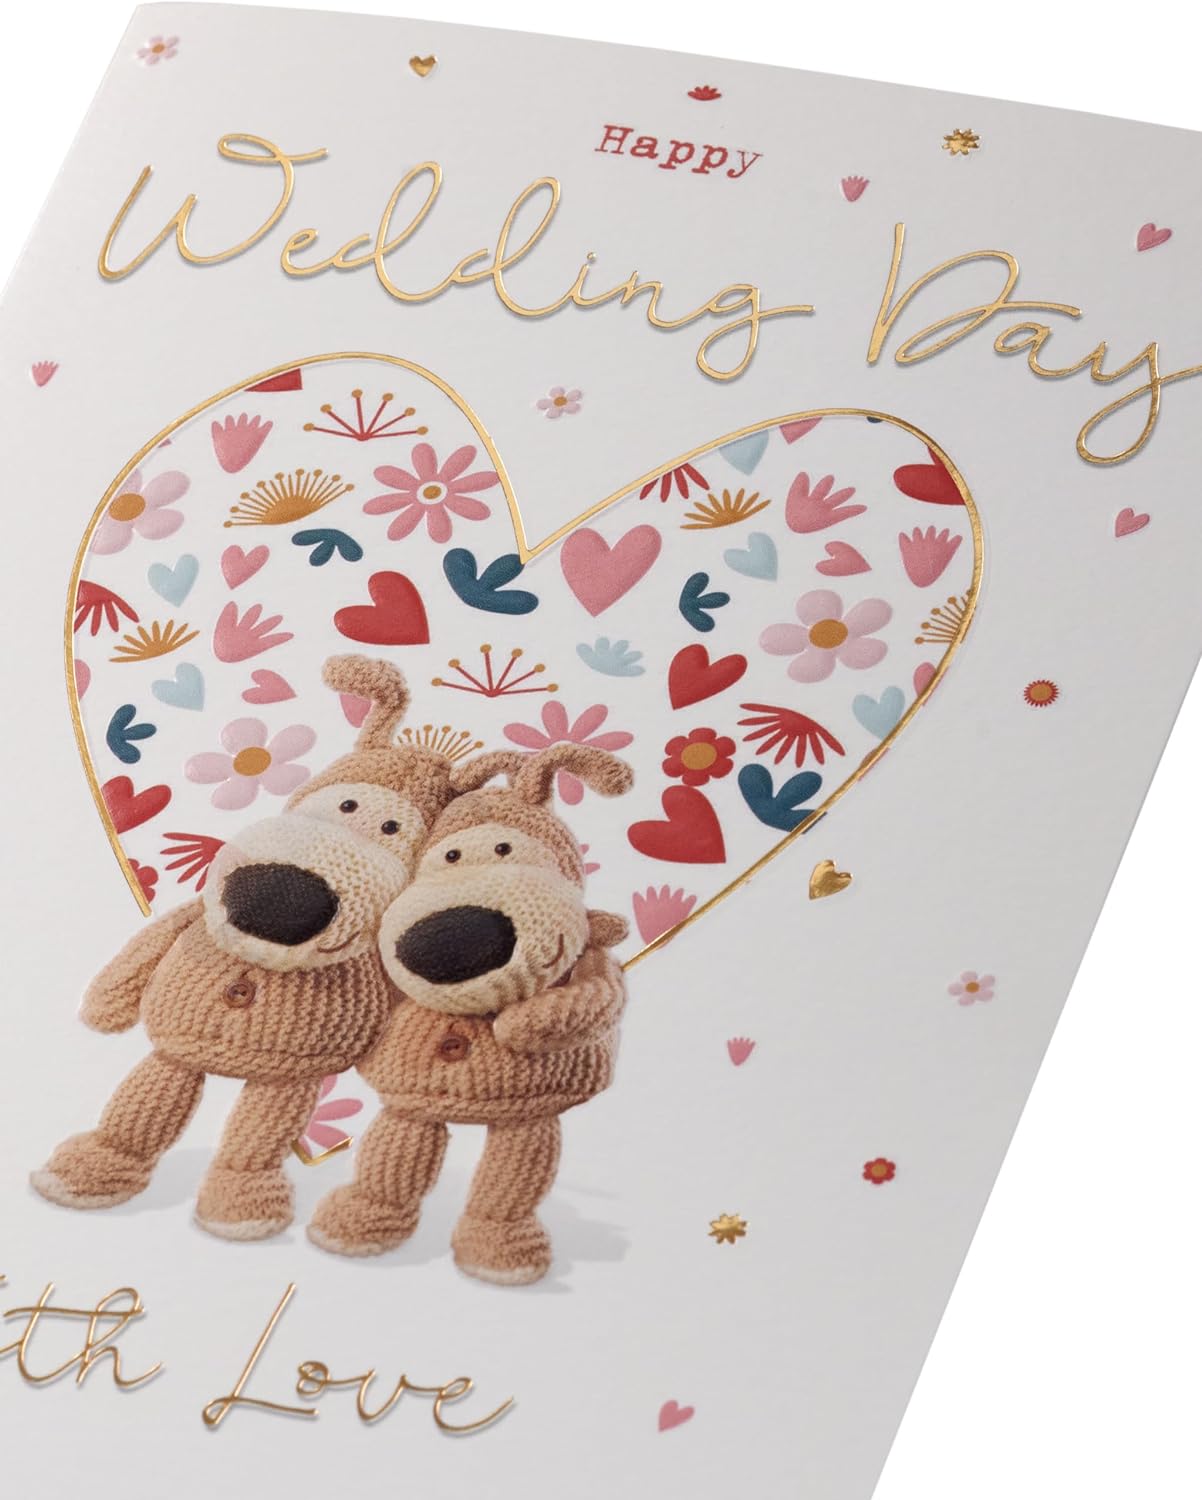 Boofle Cute Design With Love Wedding Day Congratulations Card